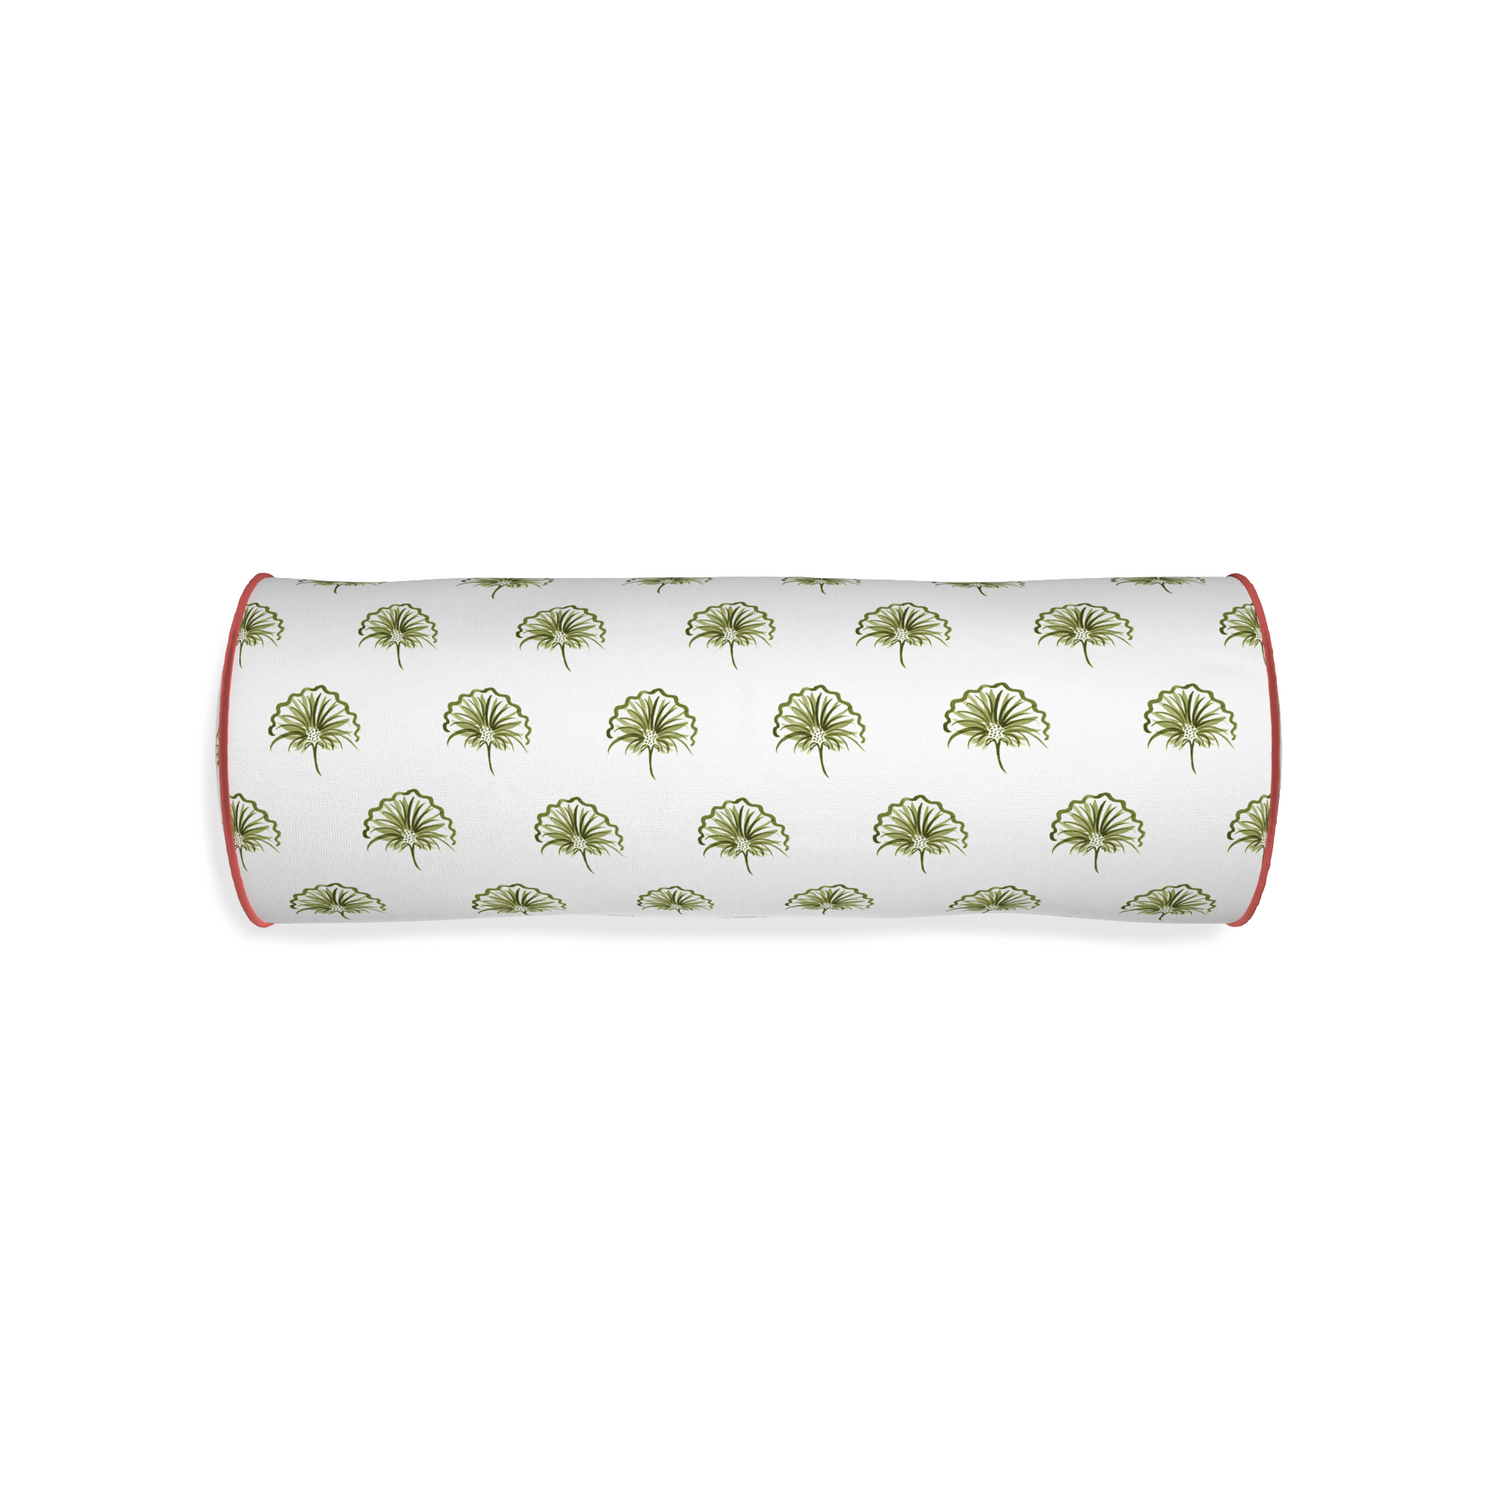 Bolster penelope moss custom pillow with c piping on white background